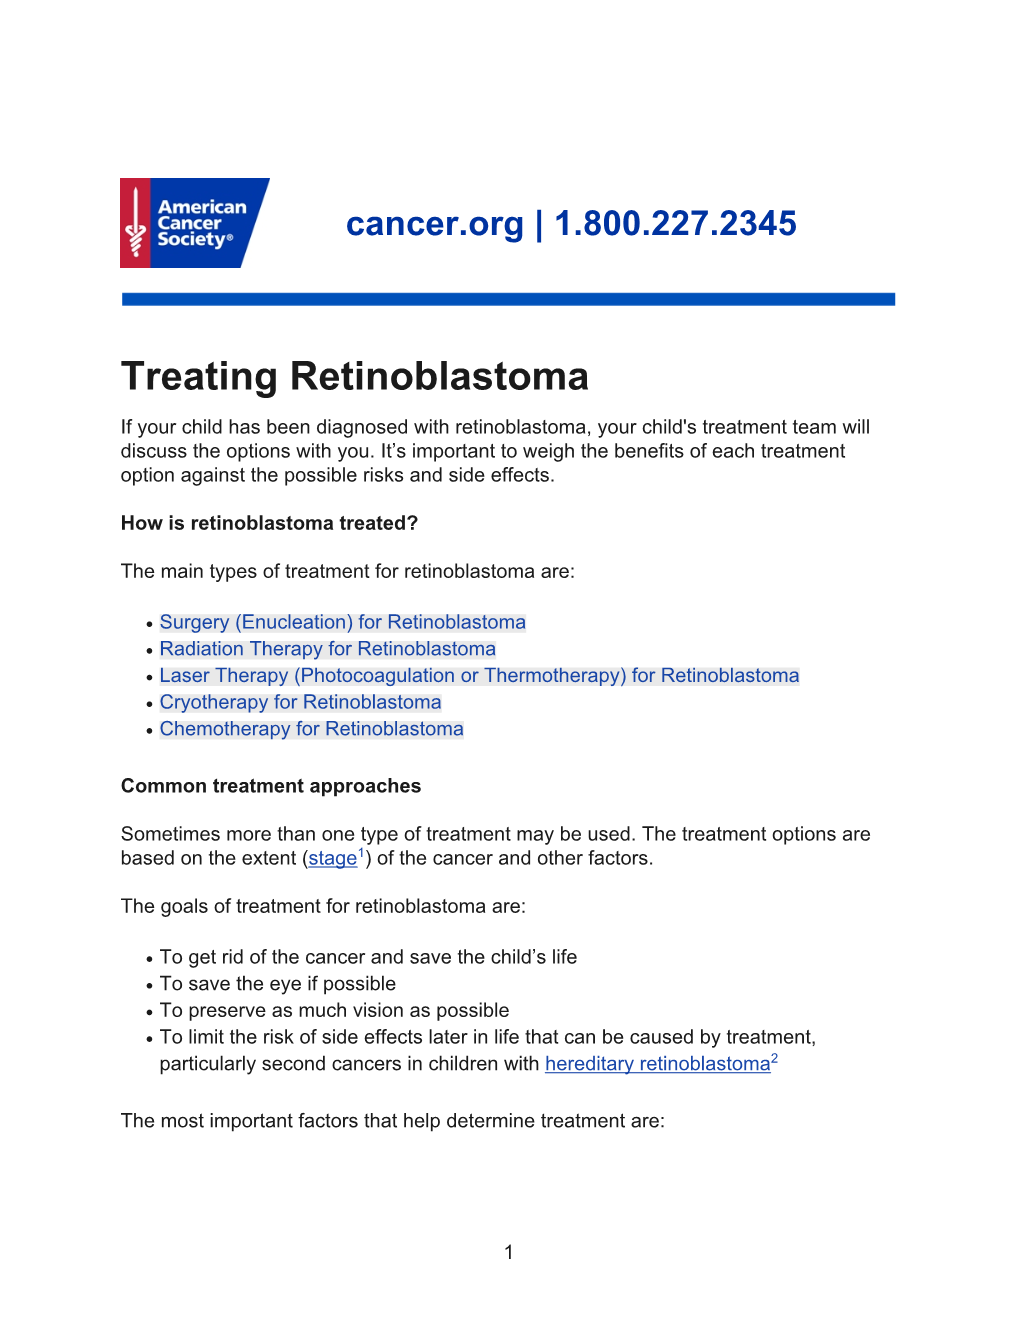 Treating Retinoblastoma If Your Child Has Been Diagnosed with Retinoblastoma, Your Child's Treatment Team Will Discuss the Options with You